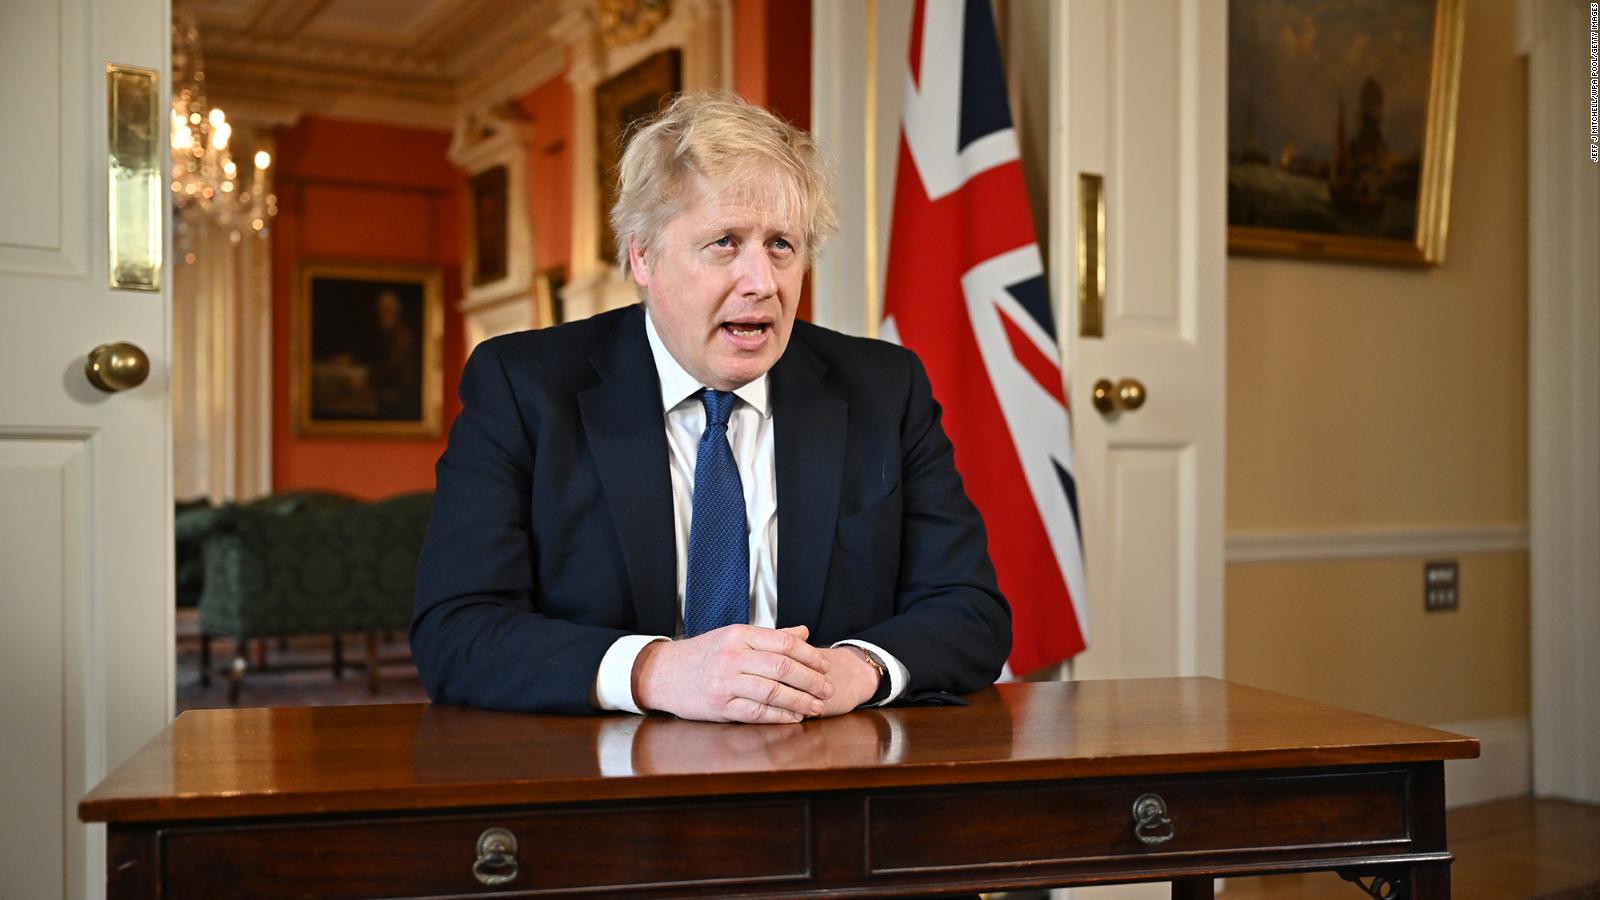 Boris Johnson Uk Prime Minister Faces No Further Action Over Downing Street Partygate